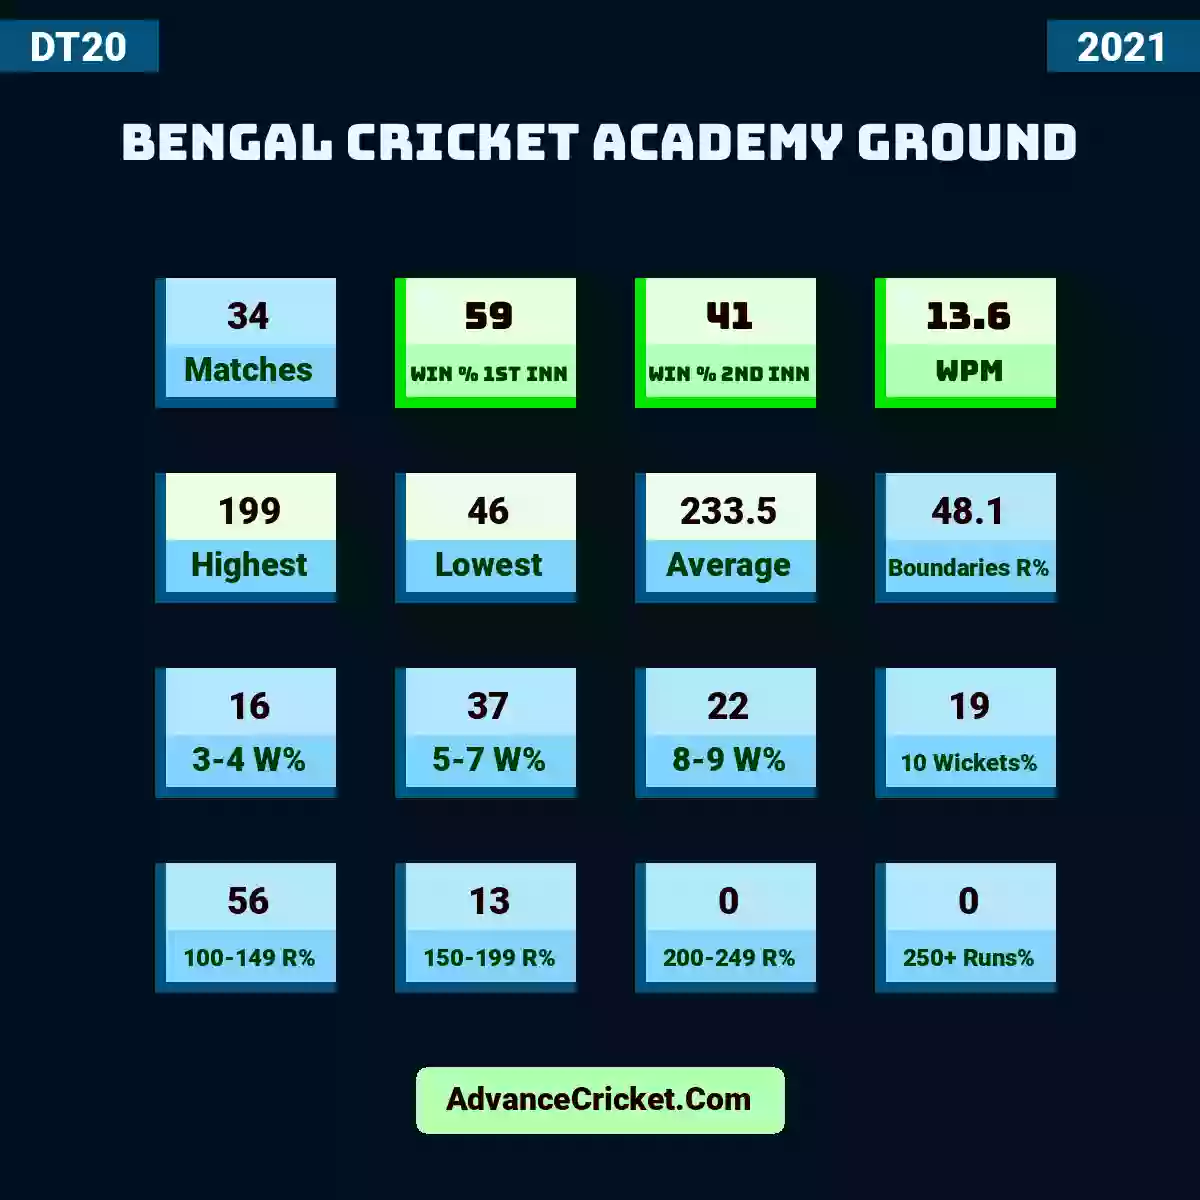 Image showing Bengal Cricket Academy Ground with Matches: 34, Win % 1st Inn: 59, Win % 2nd Inn: 41, WPM: 13.6, Highest: 199, Lowest: 46, Average: 233.5, Boundaries R%: 48.1, 3-4 W%: 16, 5-7 W%: 37, 8-9 W%: 22, 10 Wickets%: 19, 100-149 R%: 56, 150-199 R%: 13, 200-249 R%: 0, 250+ Runs%: 0.